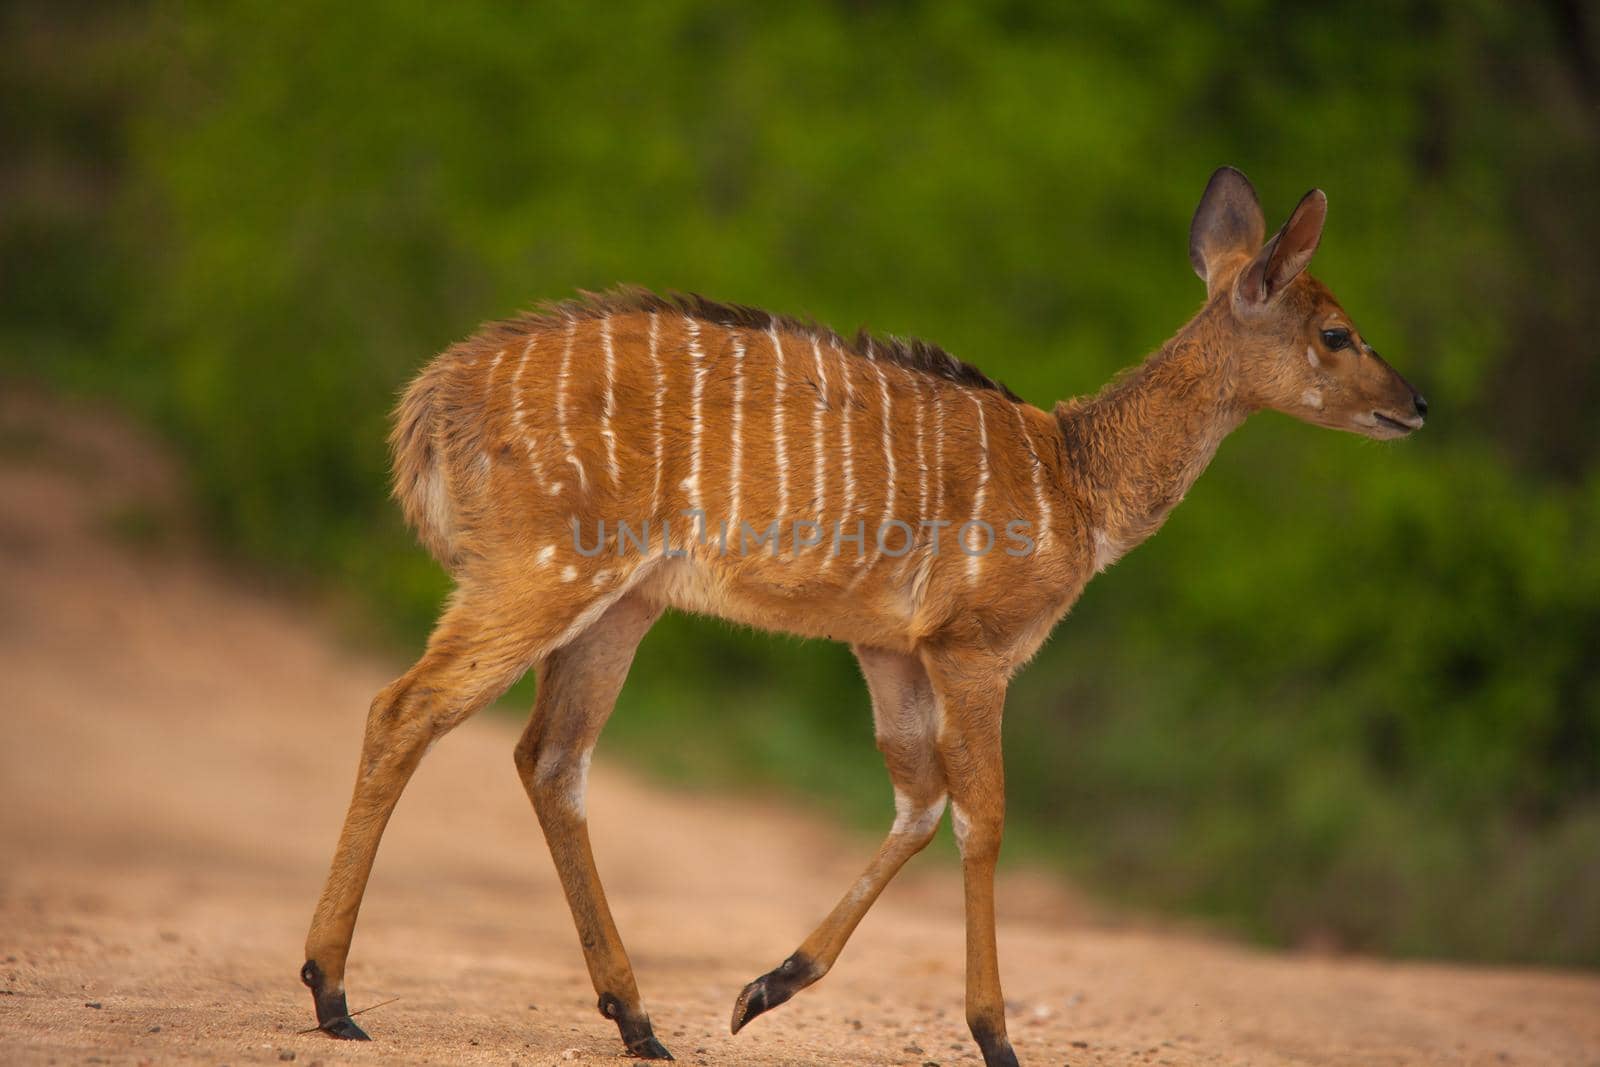 A Nyala female (Tragelaphus angasii) crossing a road in Kruger National Park, south Africa